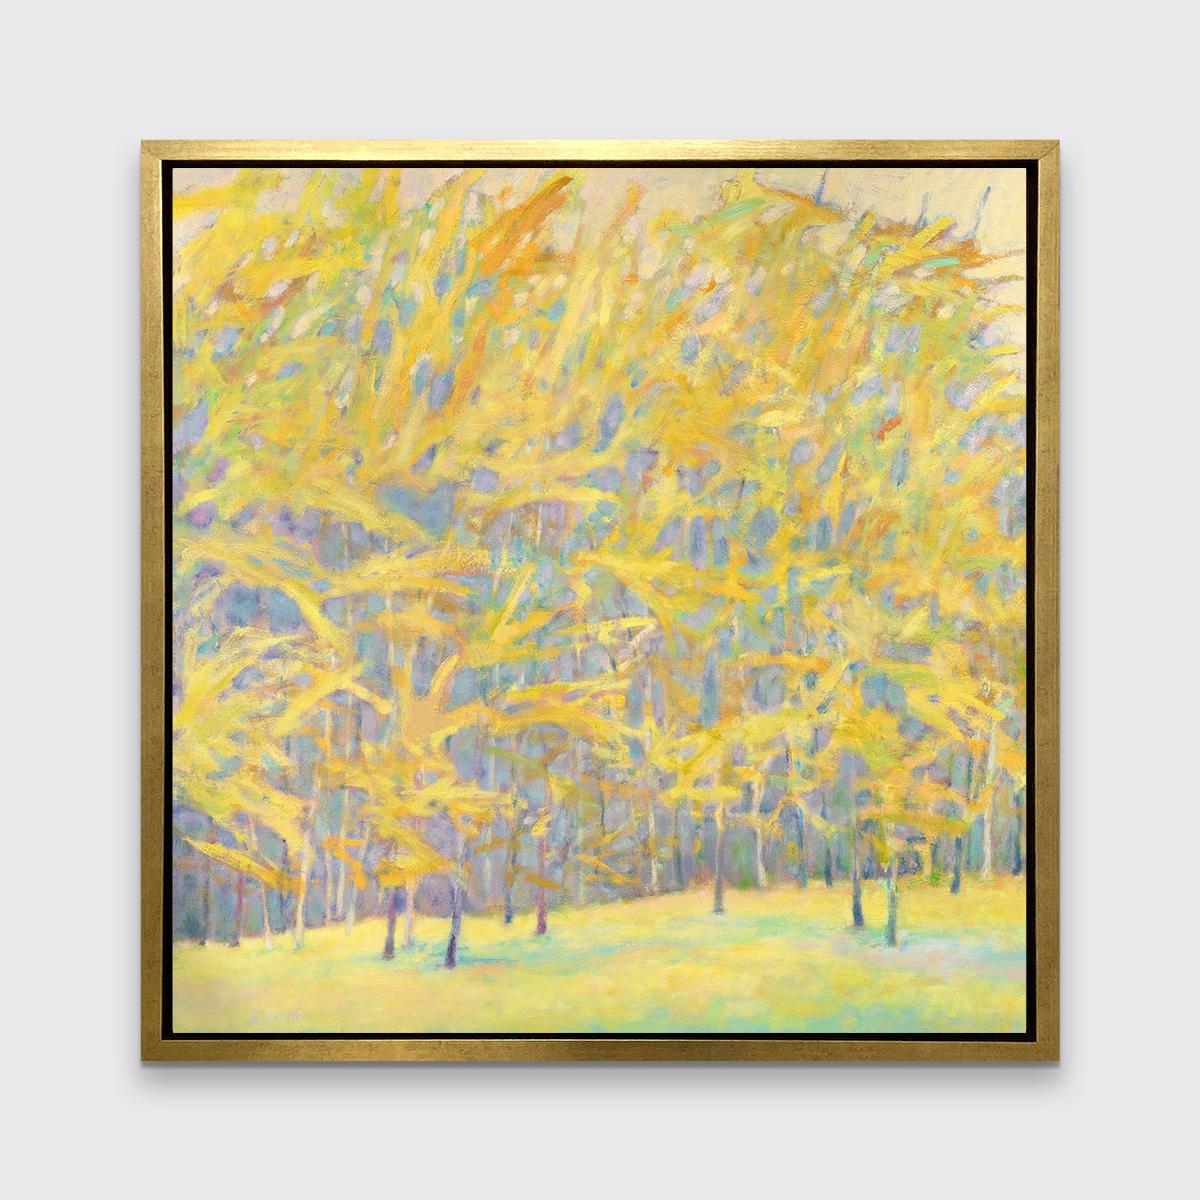 This abstract landscape limited edition print by Ken Elliott features a forest-scape with bright yellow tree leaves which are mirrored by the yellow foreground, all of which is complemented by the light violet shadows between the trees and light